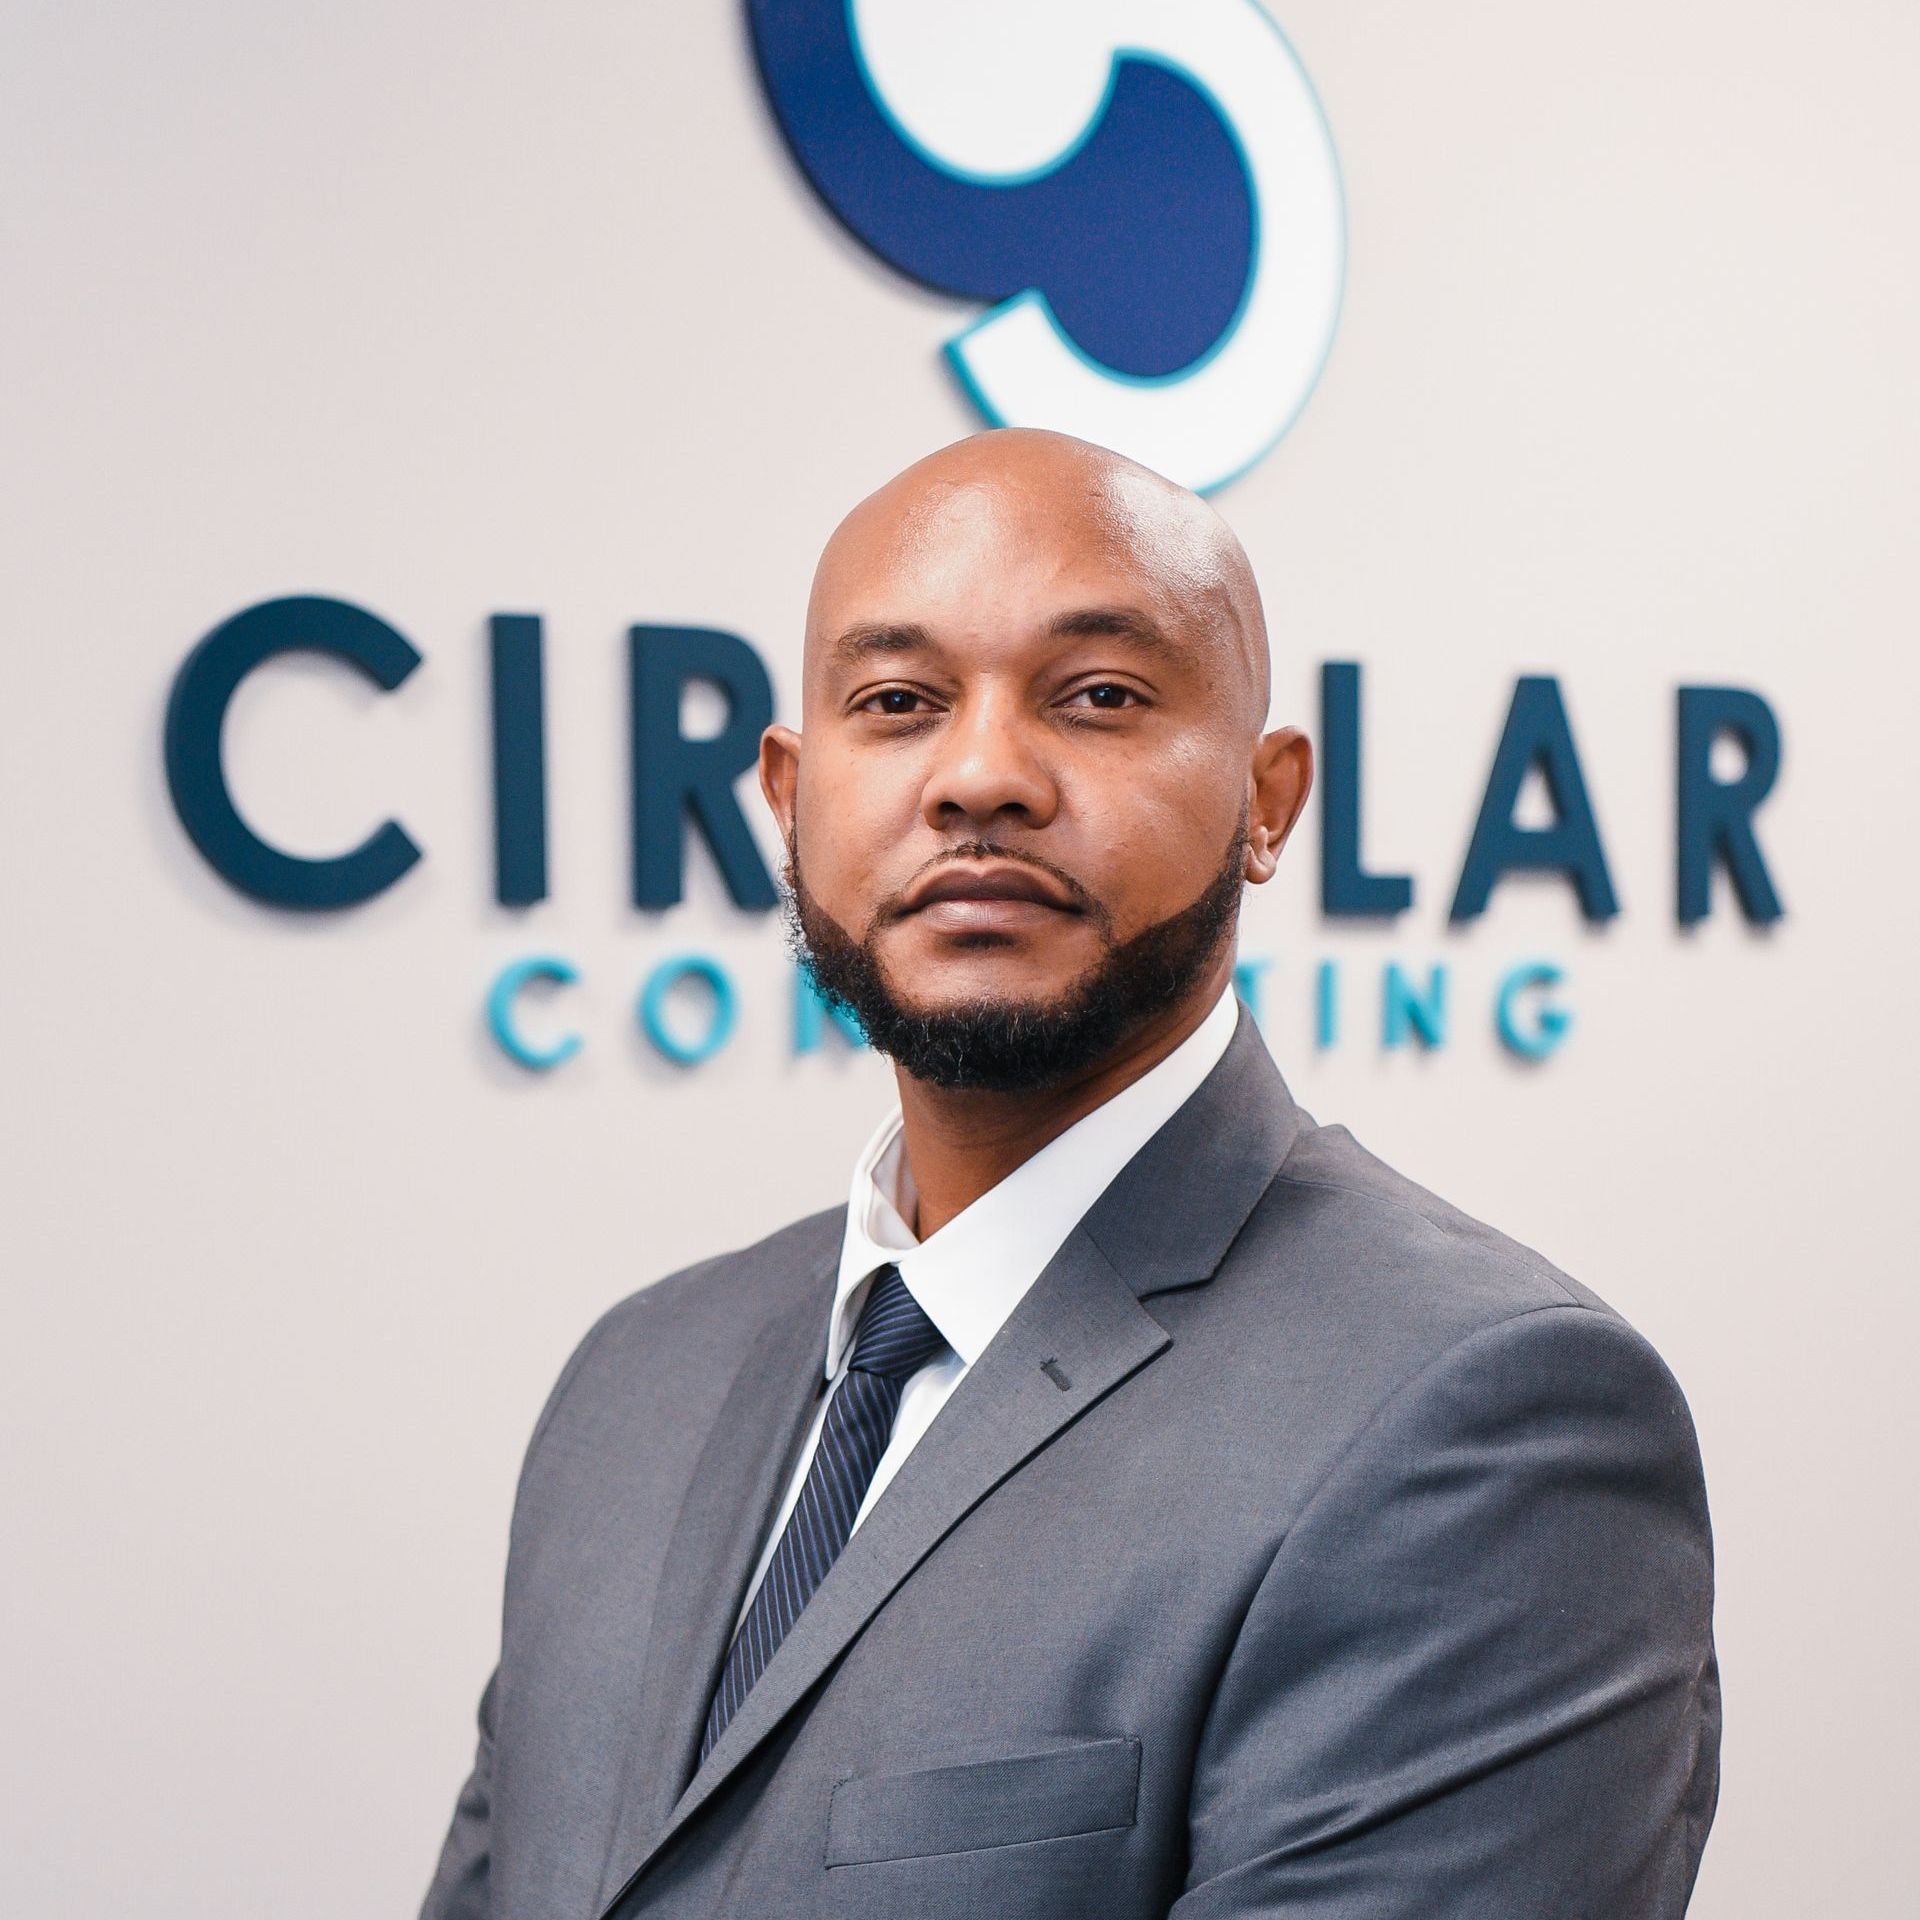 a man in a suit and tie is standing in front of a circular consulting sign